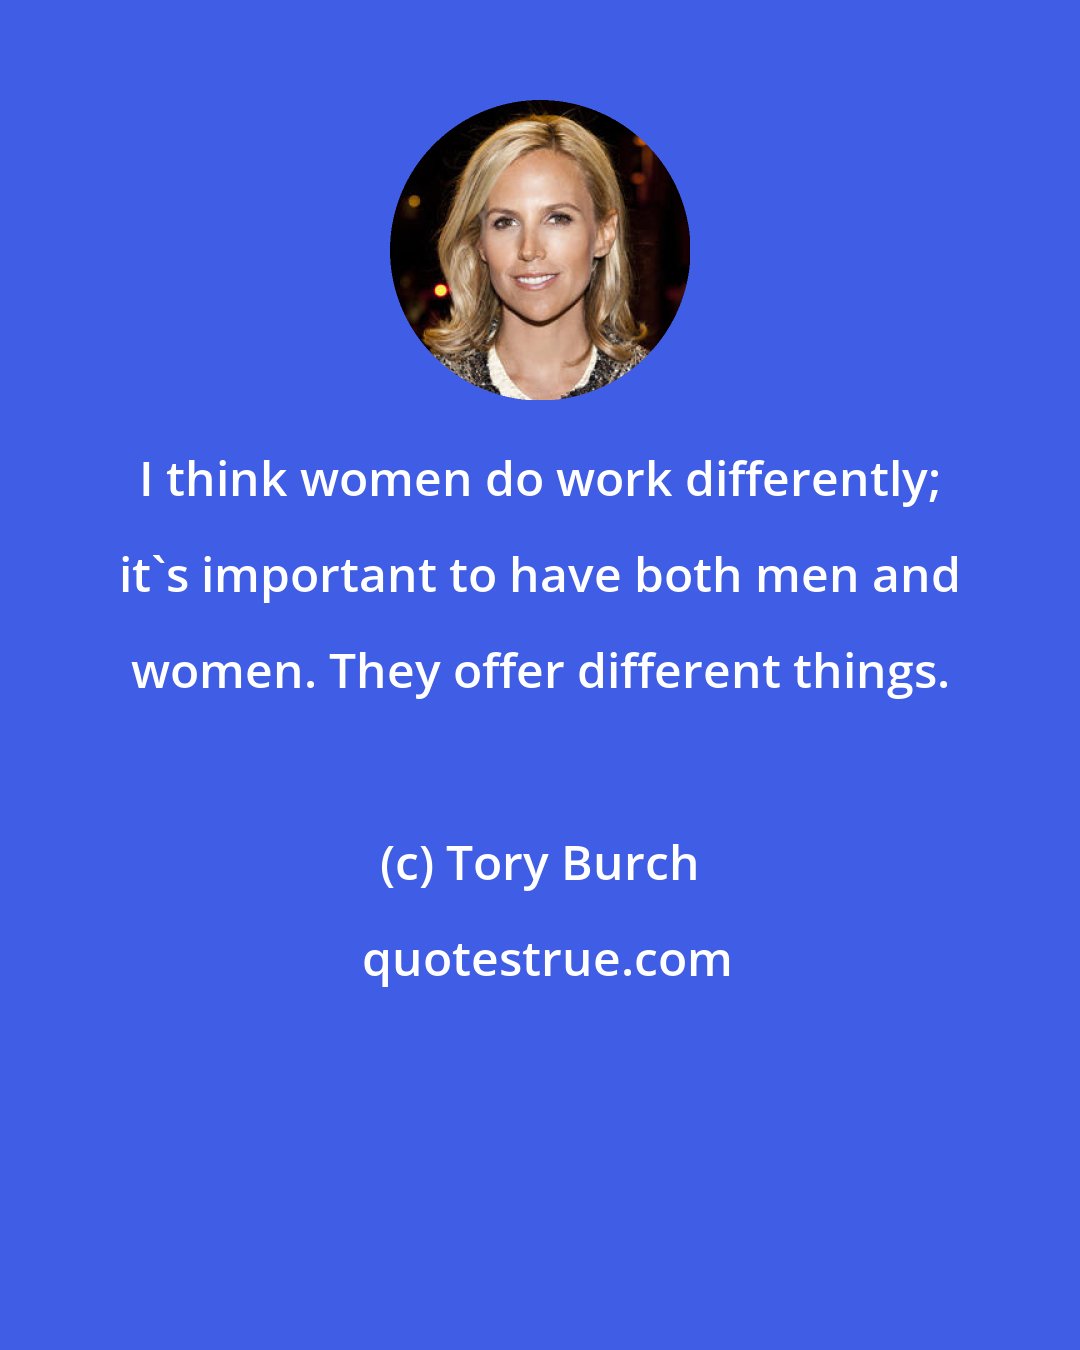 Tory Burch: I think women do work differently; it's important to have both men and women. They offer different things.